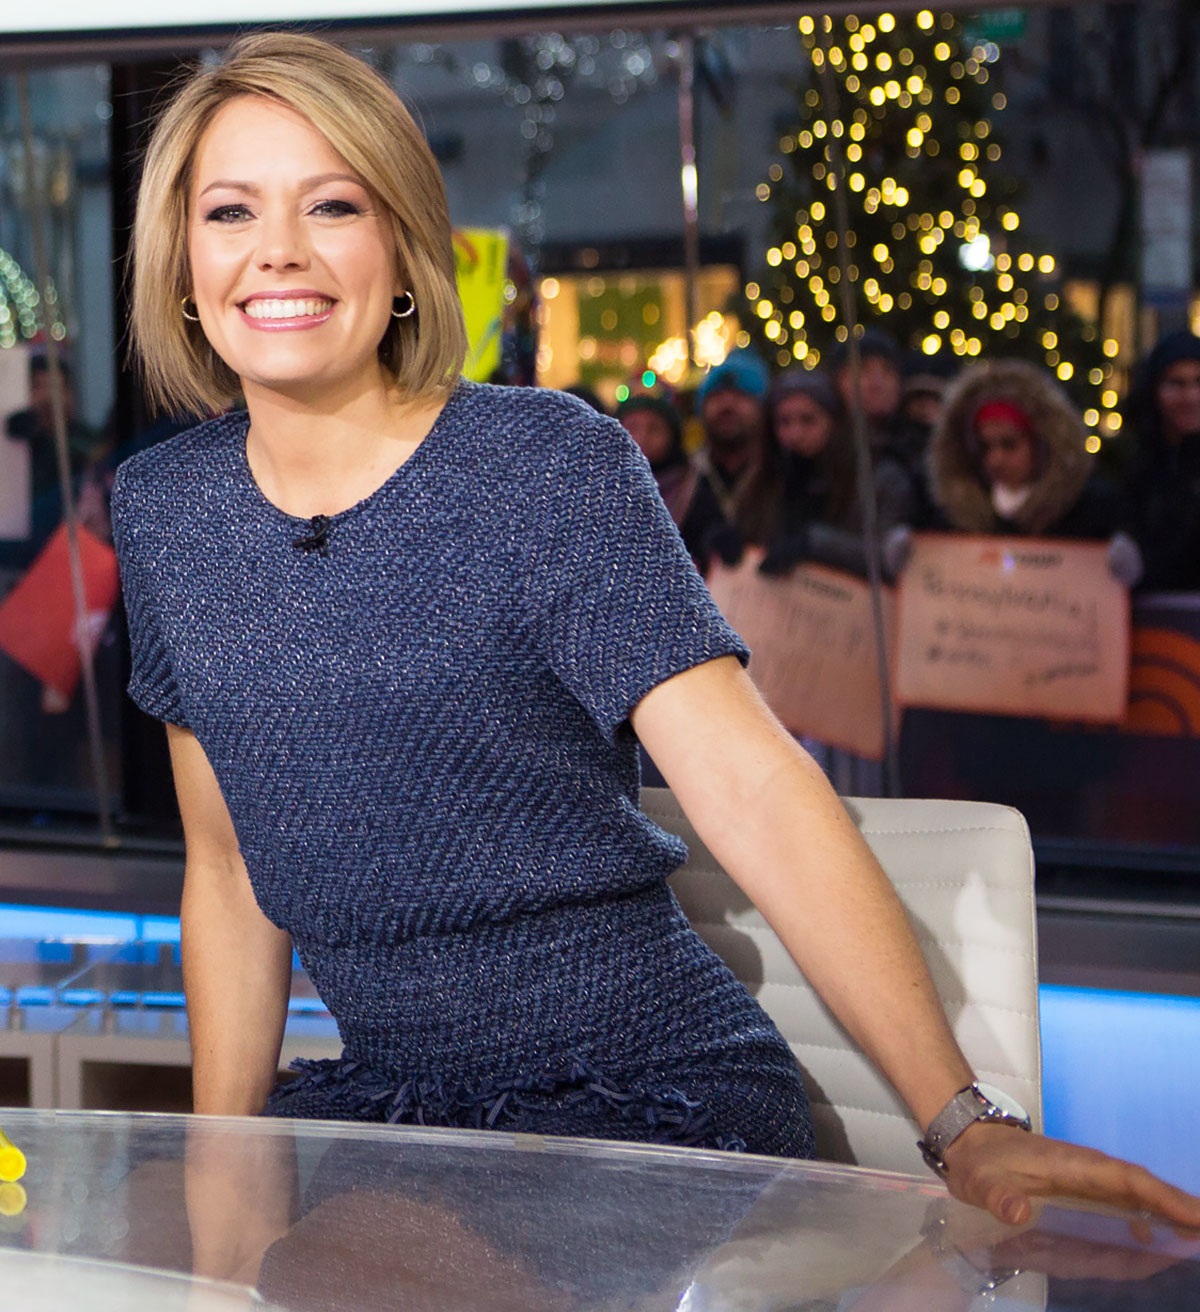 Alyssa Hart Pregnant Sex Videos - Today's Dylan Dreyer Is Pregnant, Expecting 3rd Child With Husband